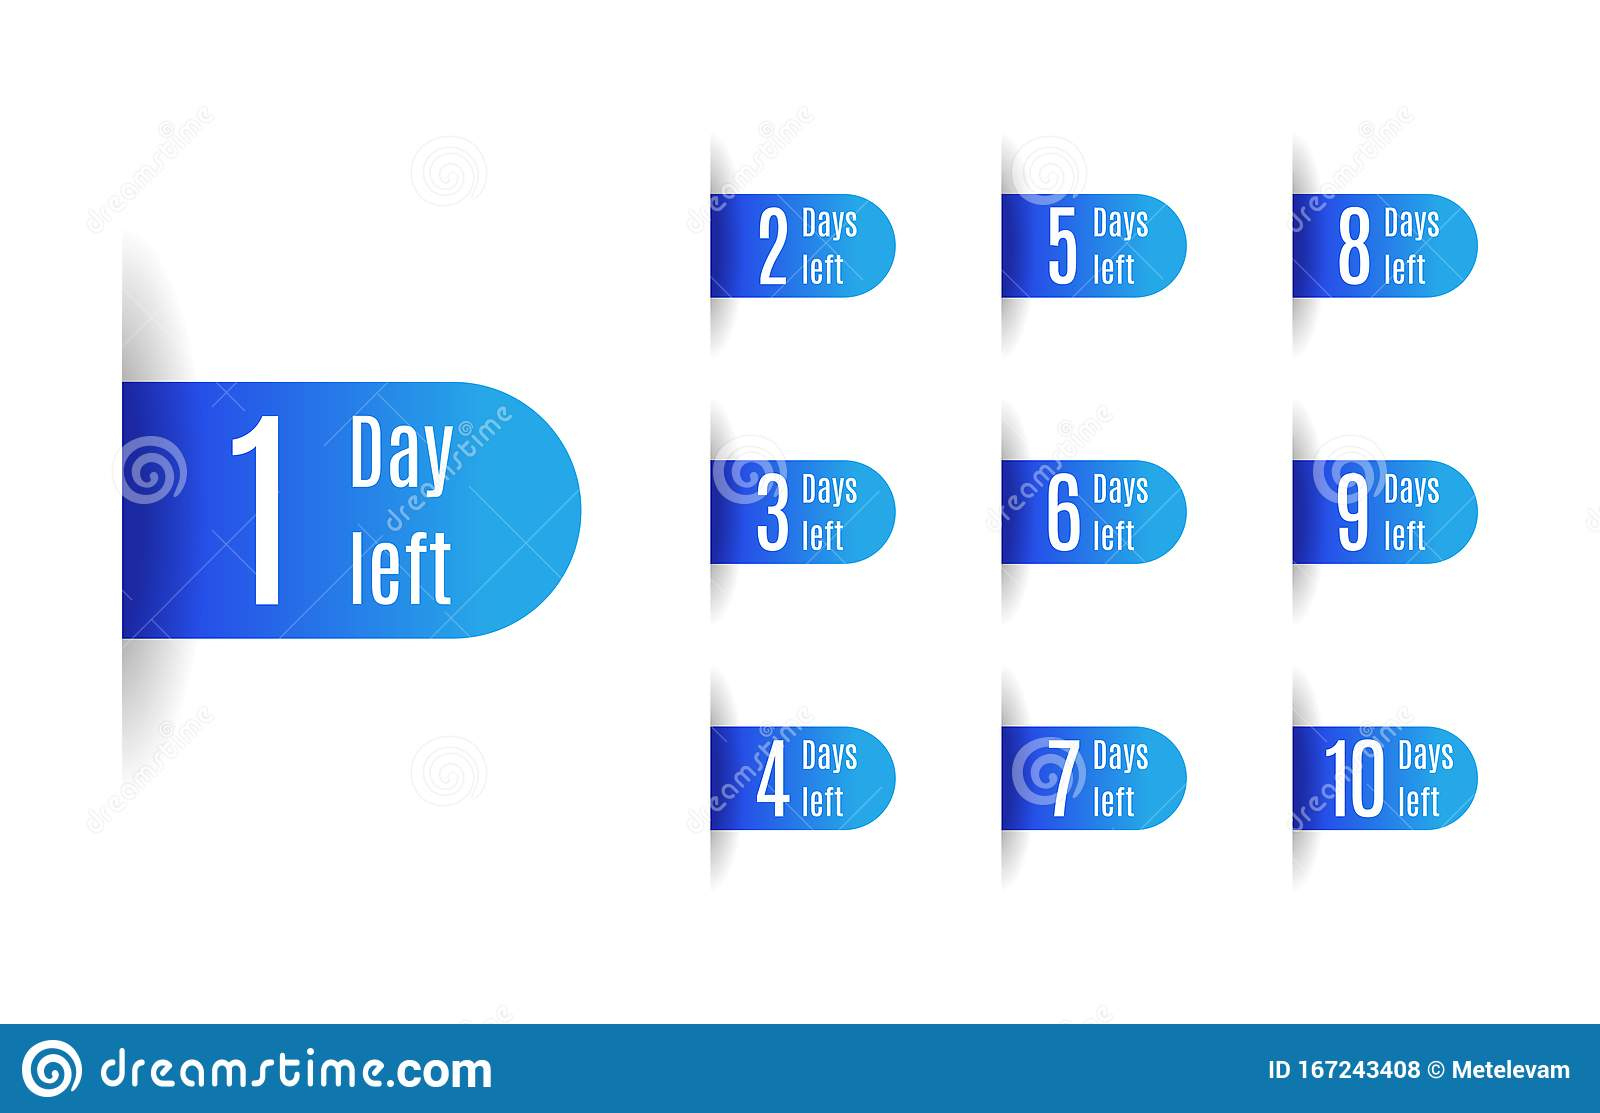 Count Time Sale. Day Countdown Badge. Number Of Days Left 14 Day Countdown Templates